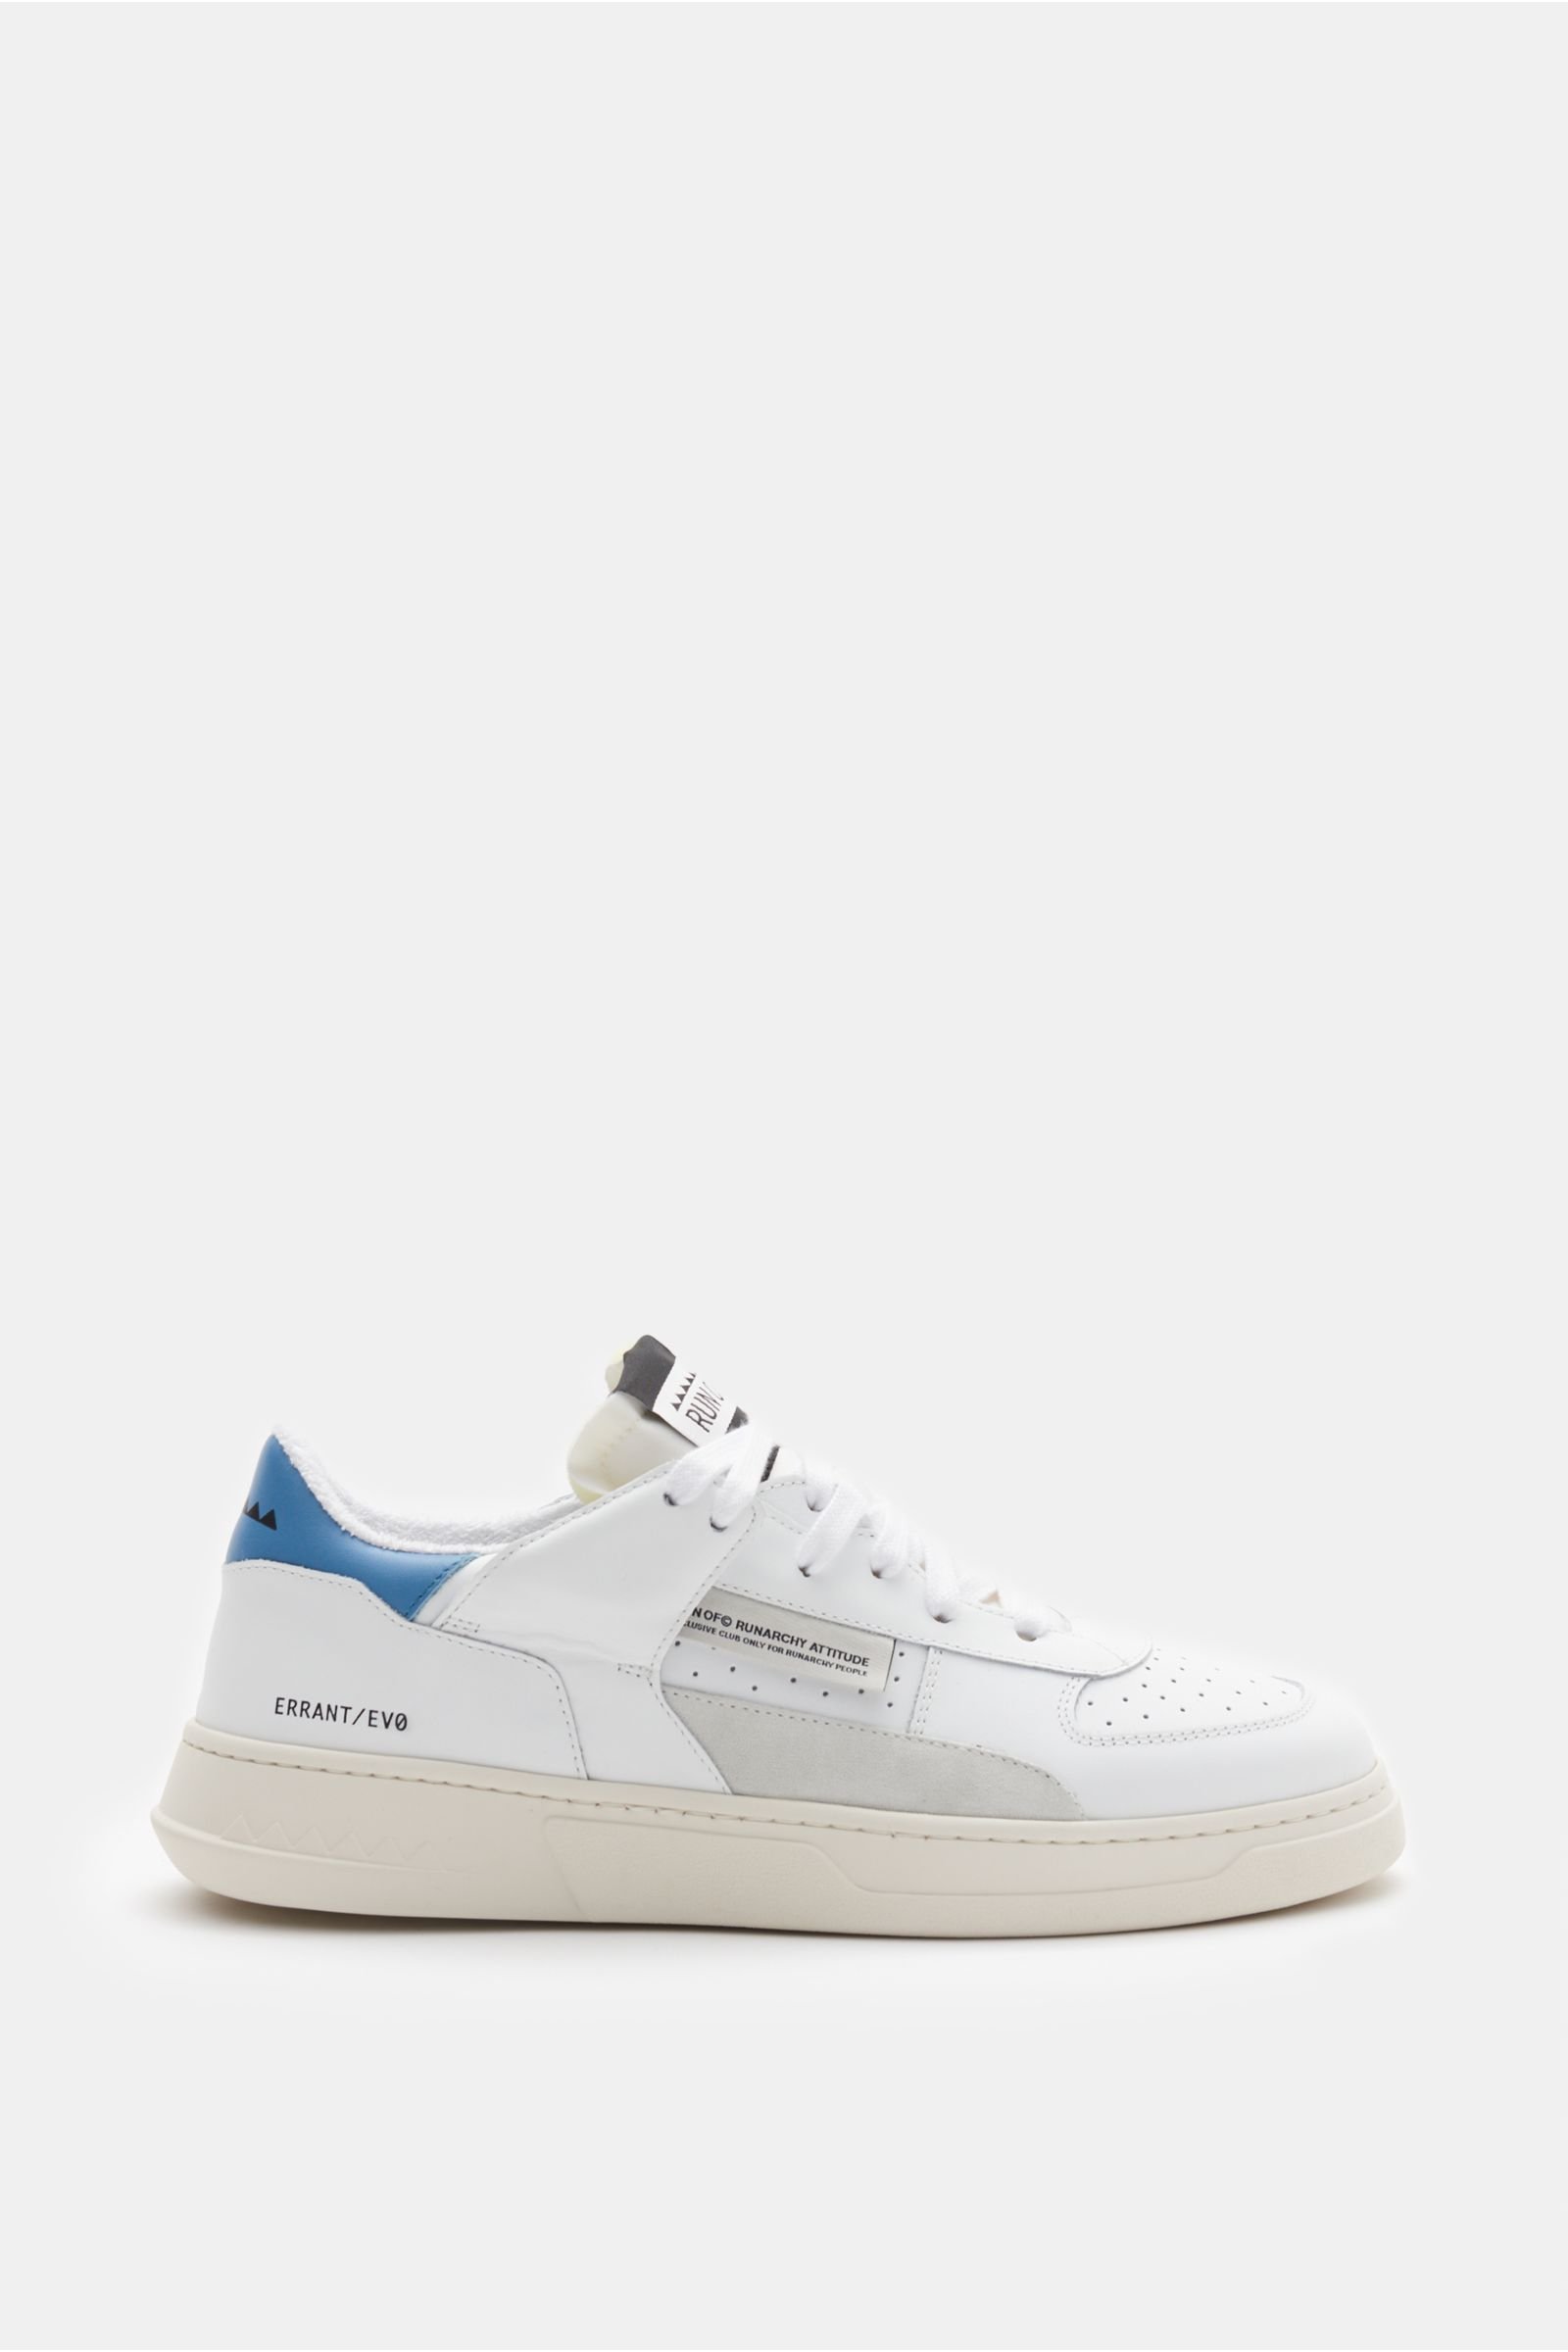 Sneakers 'Air' white/smoky blue